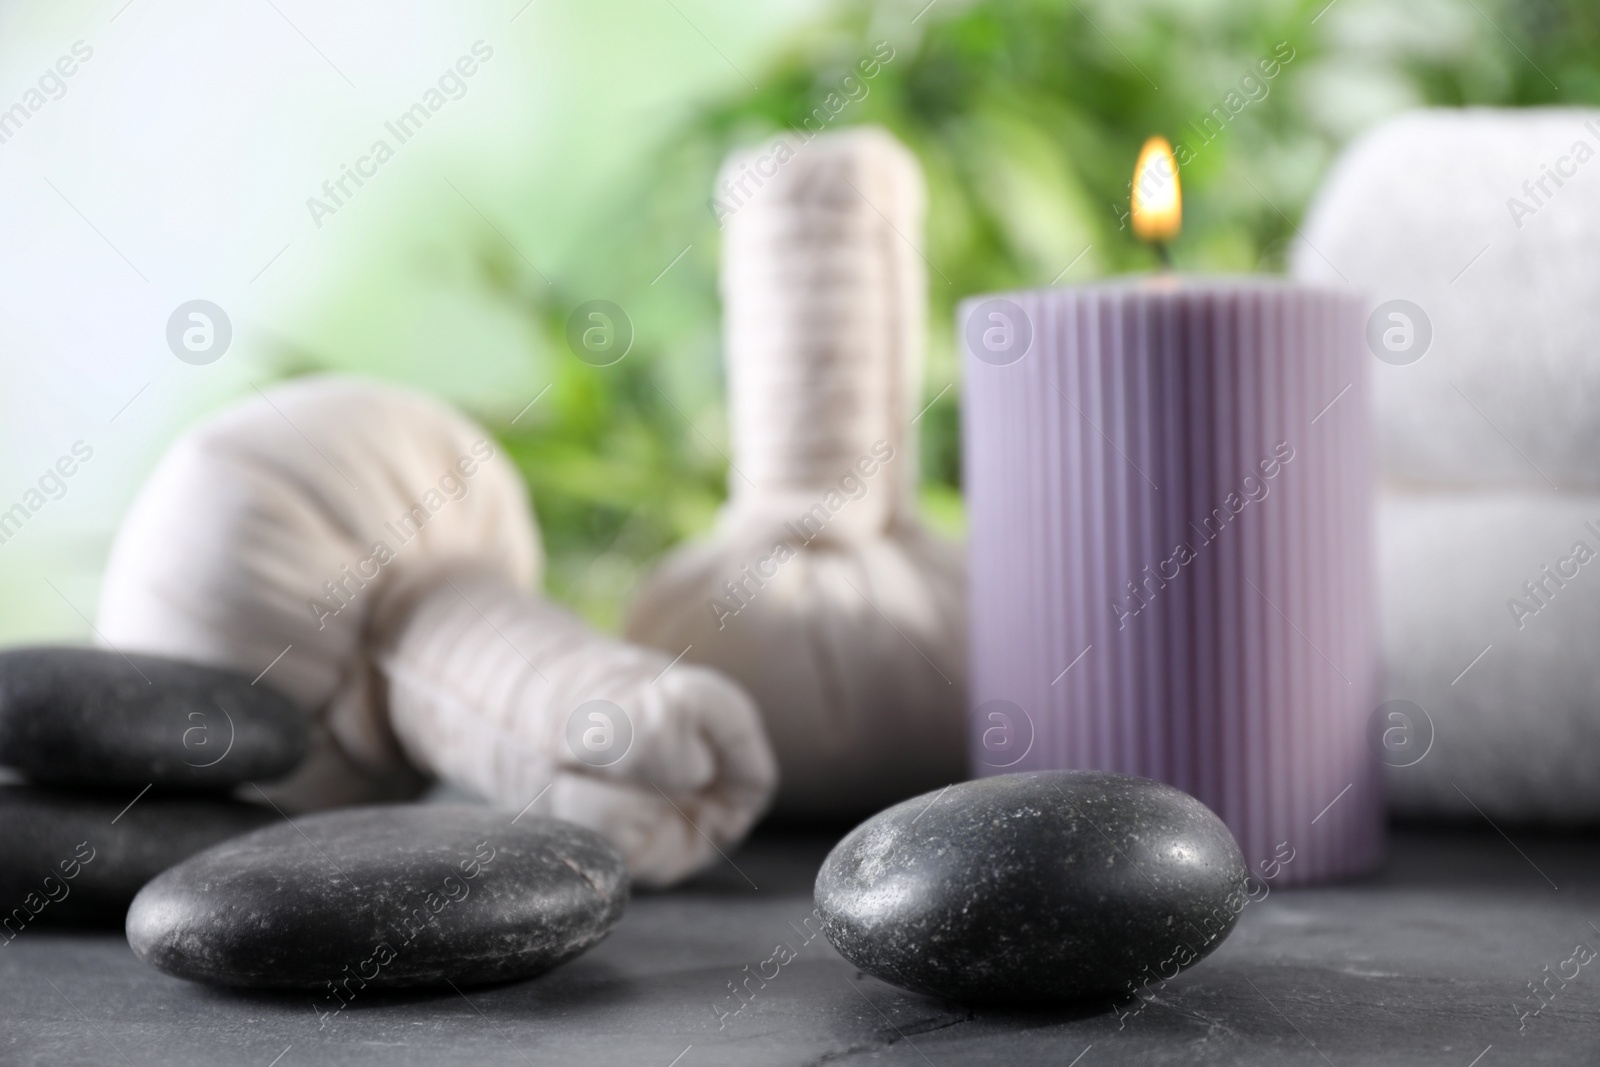 Photo of Composition with stones and spa accessories on black table against blurred background. Space for text